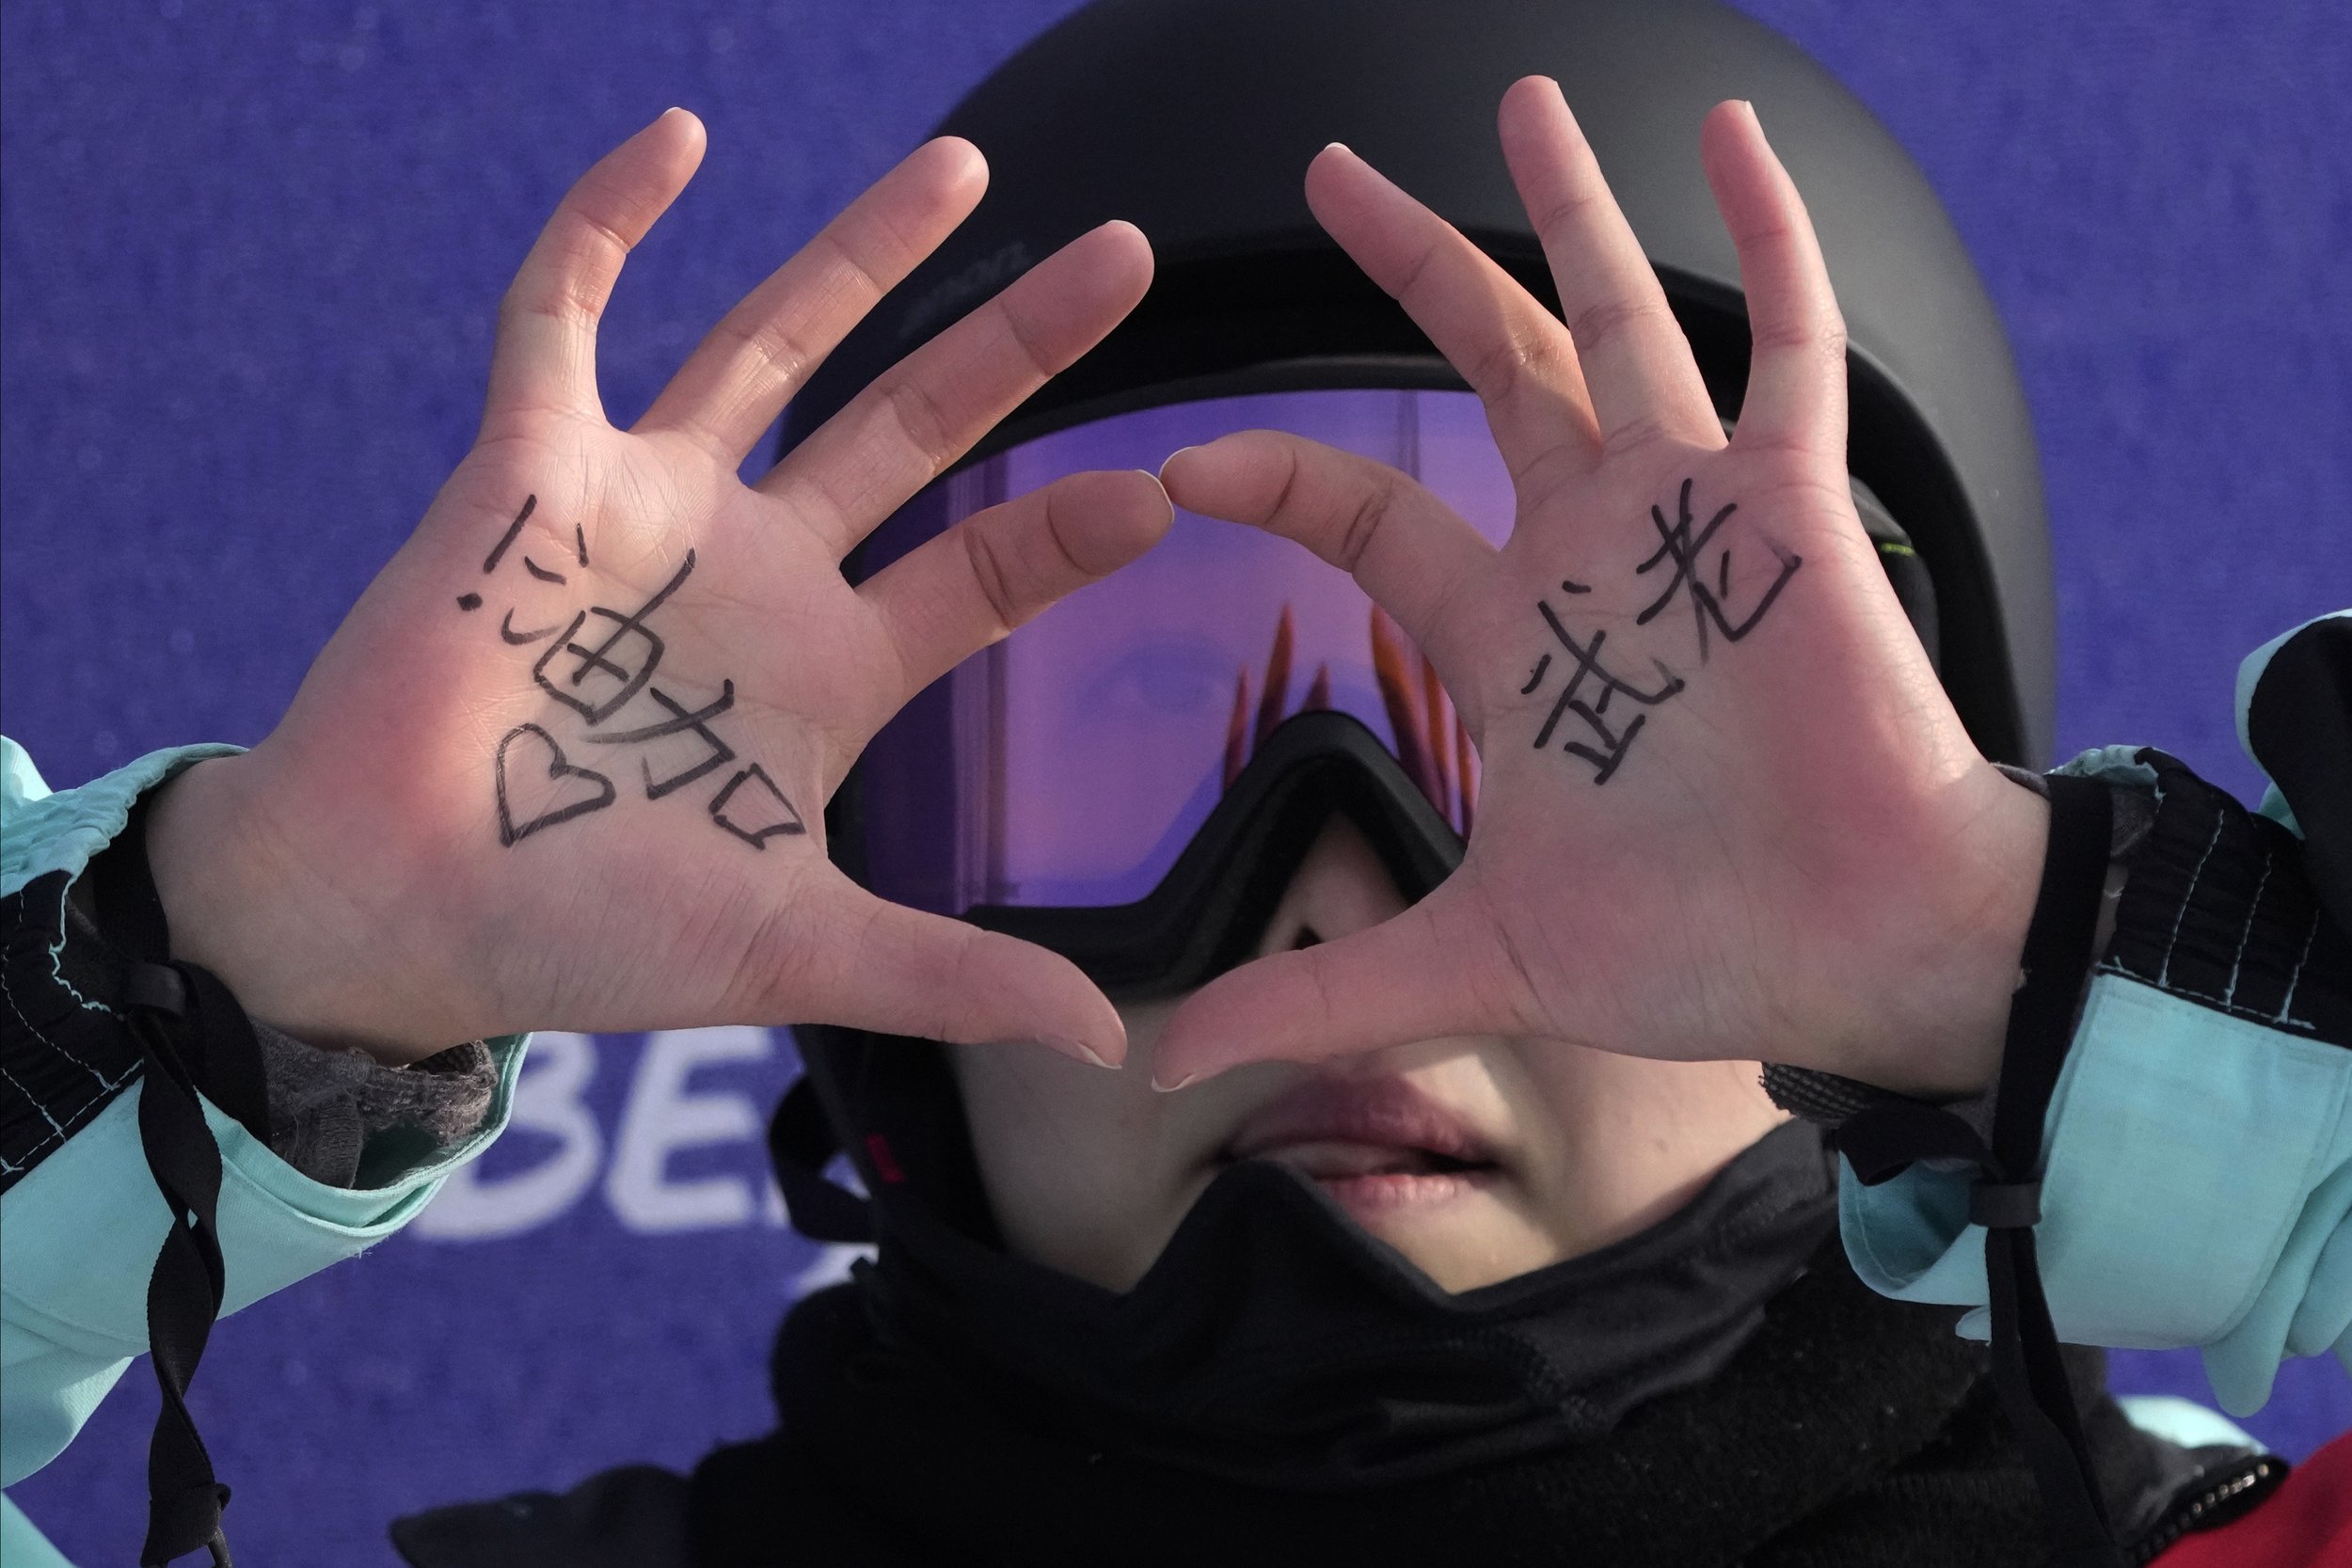  China's Qiu Leng holds up her hands with words of encouragement during the women's halfpipe finals at the 2022 Winter Olympics, Thursday, Feb. 10, 2022, in Zhangjiakou, China. (AP Photo/Lee Jin-man) 